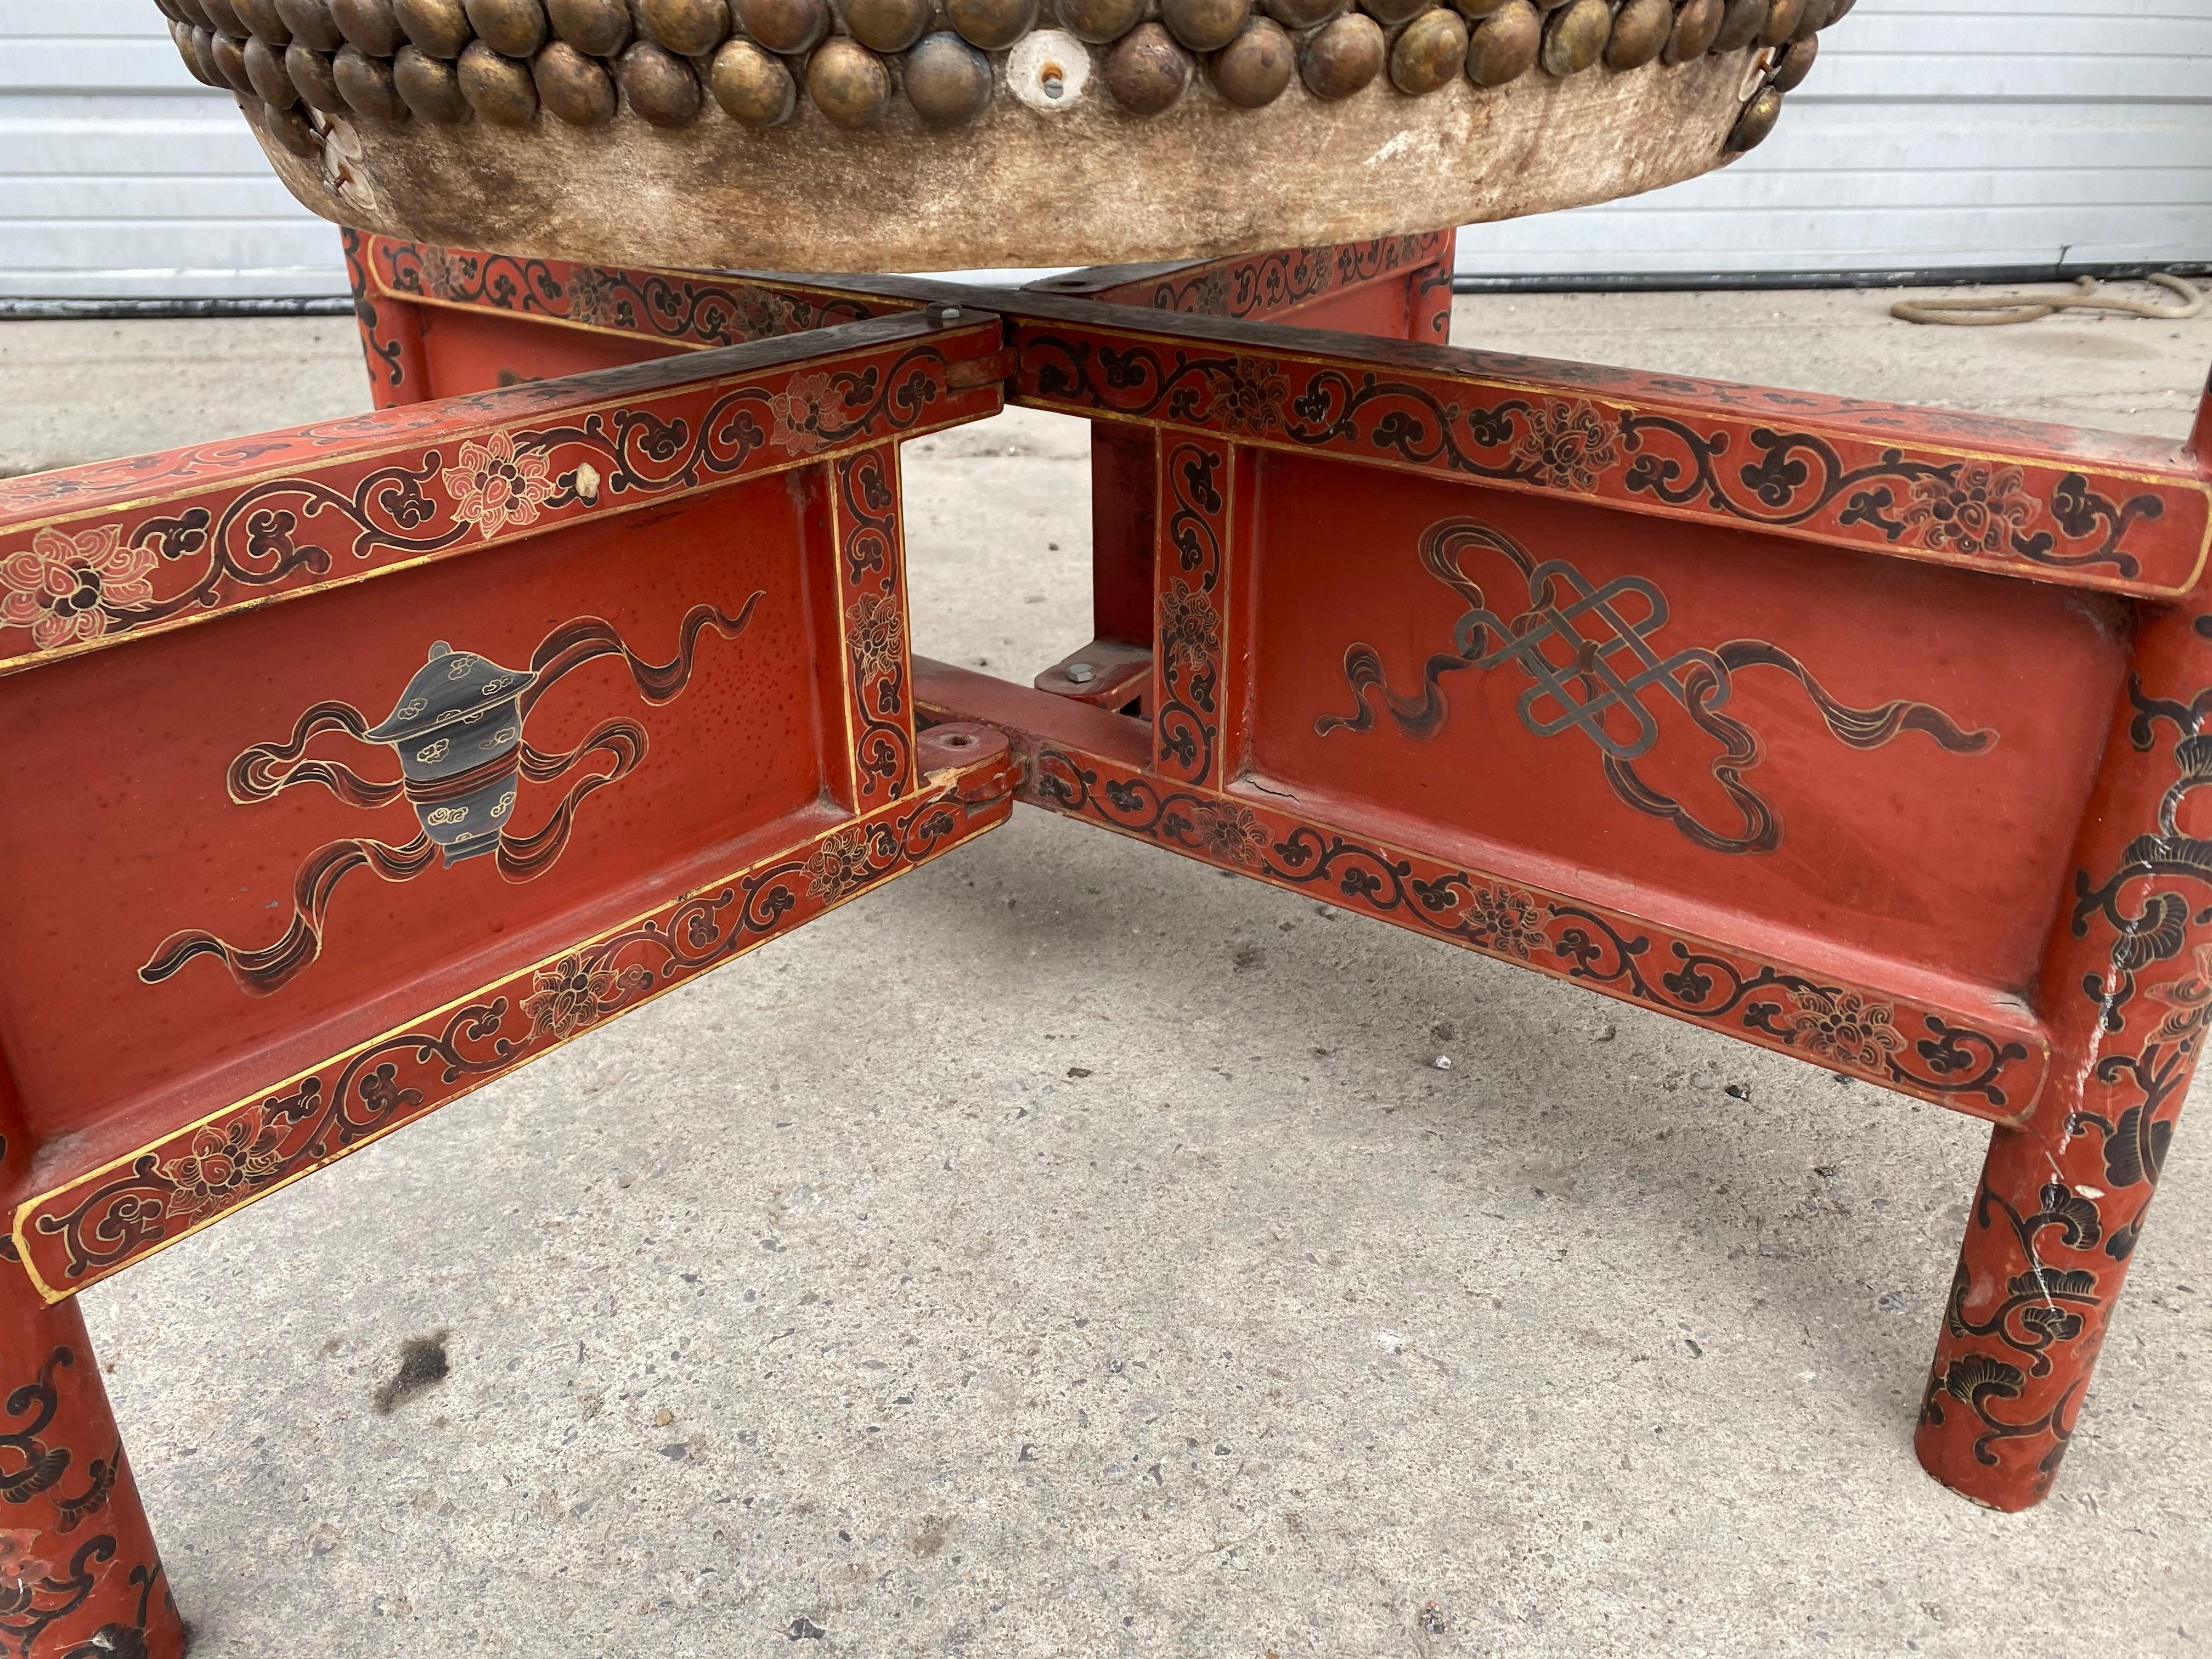 Late 19th Century Large 19th Century Qing Dynasty Chinese Ceremonial Lacquered Drum, Dragon Stand